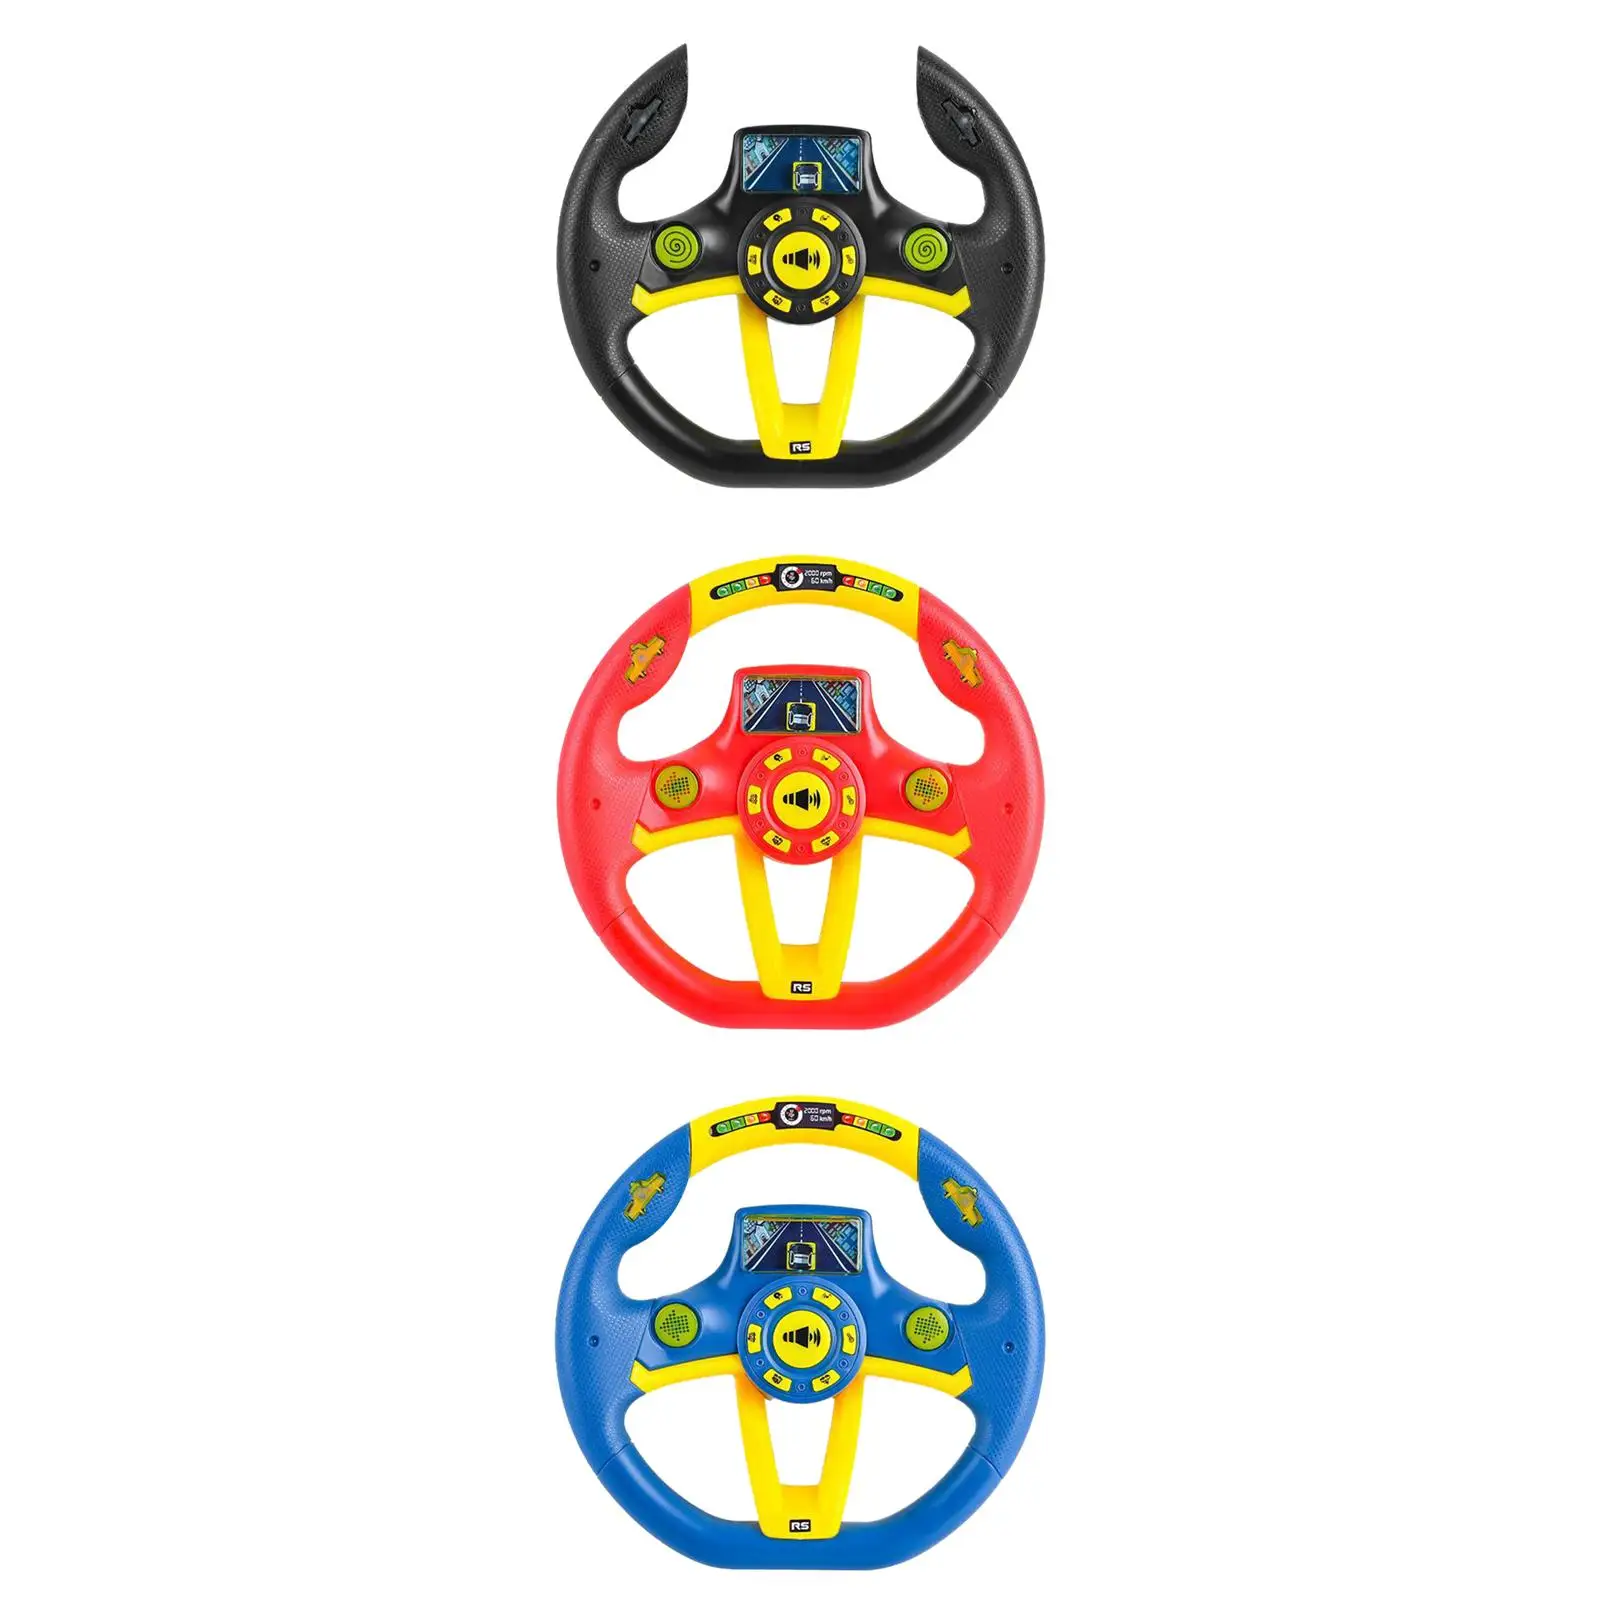 Round Steering Wheel Toy with Lights Busy Board DIY Accessory for Outdoor Playground Amusement Park Birthday Gifts